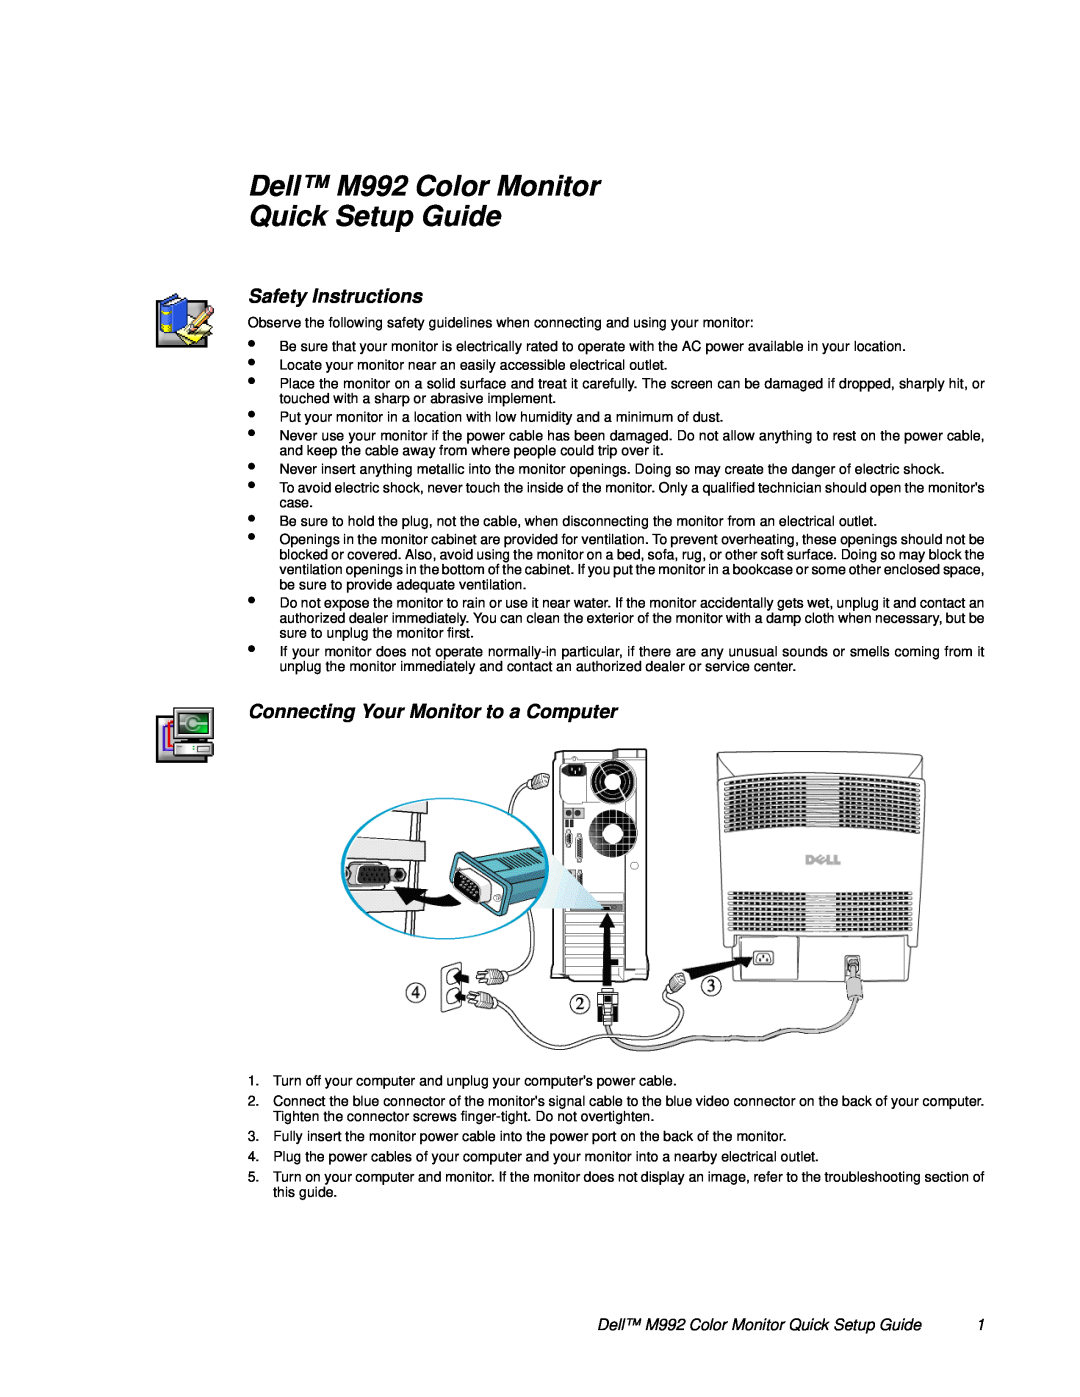 Dell M992 setup guide Safety Instructions, Connecting Your Monitor to a Computer 